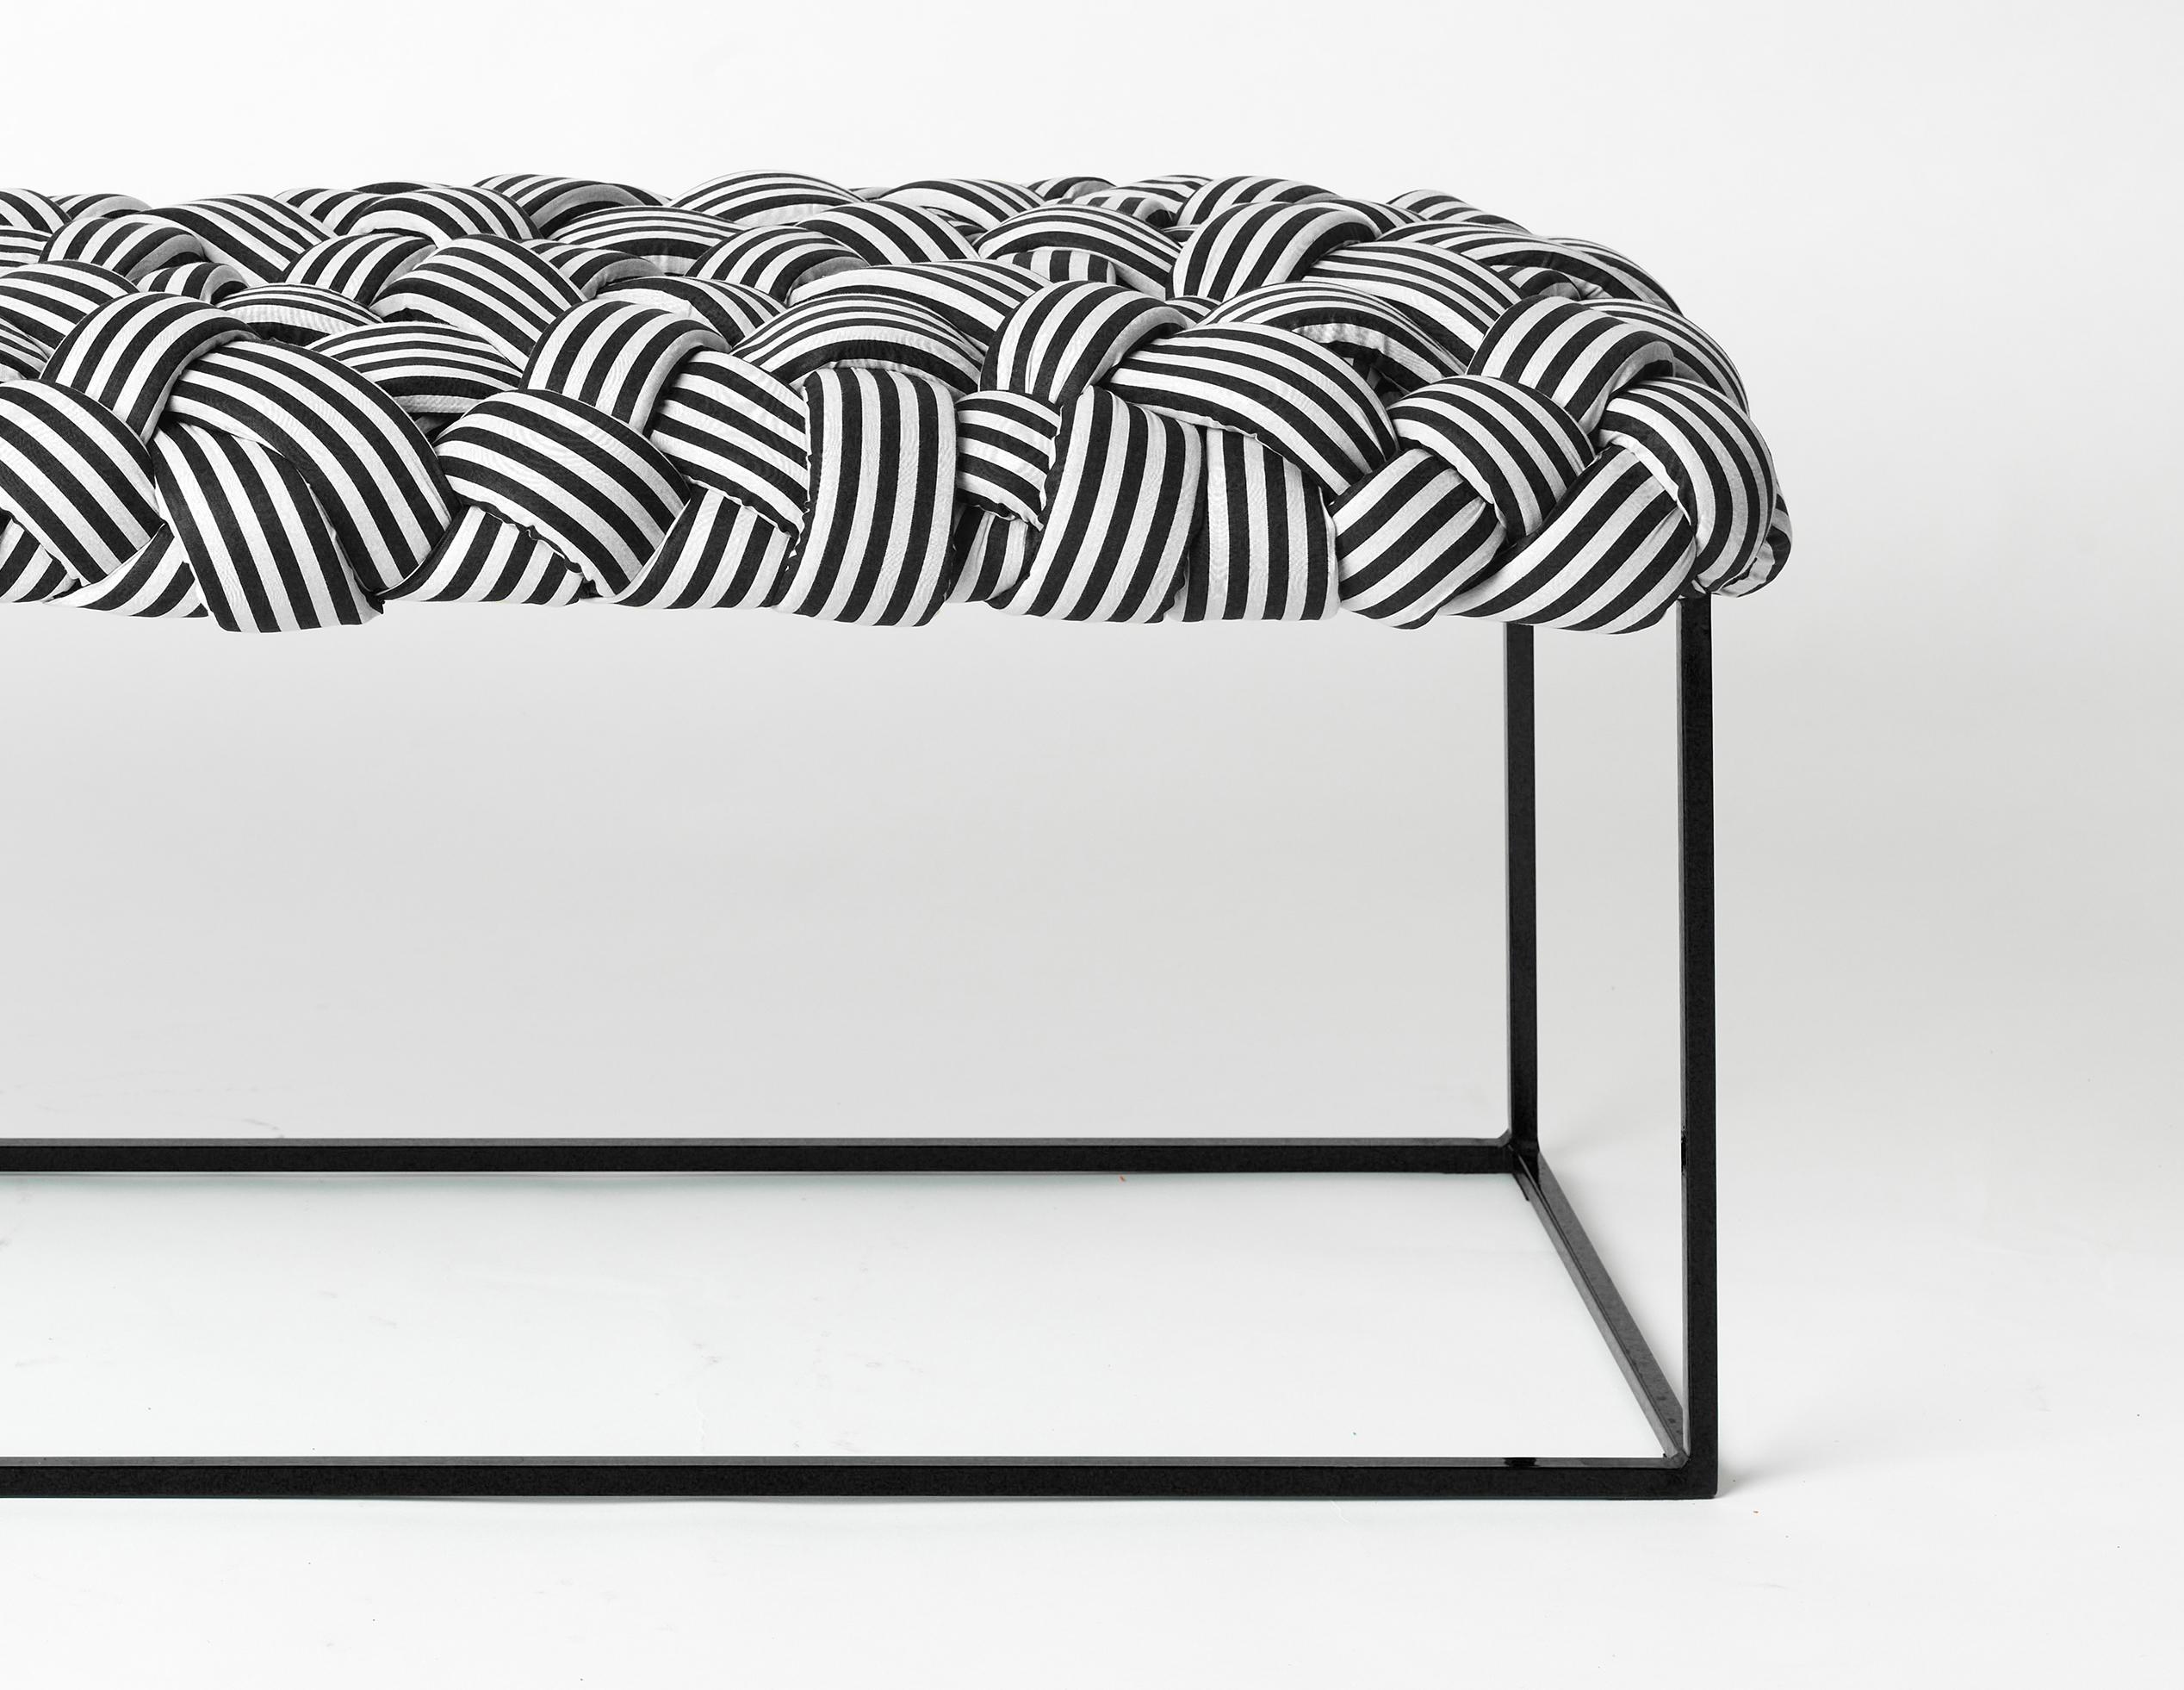 The Cloud collection was created around the concept of tress. These contemporary styled benches and stools are made with cotton fabric and foam stripes, woven and stitched by hand. Each piece is unique, as the result of the manual process of